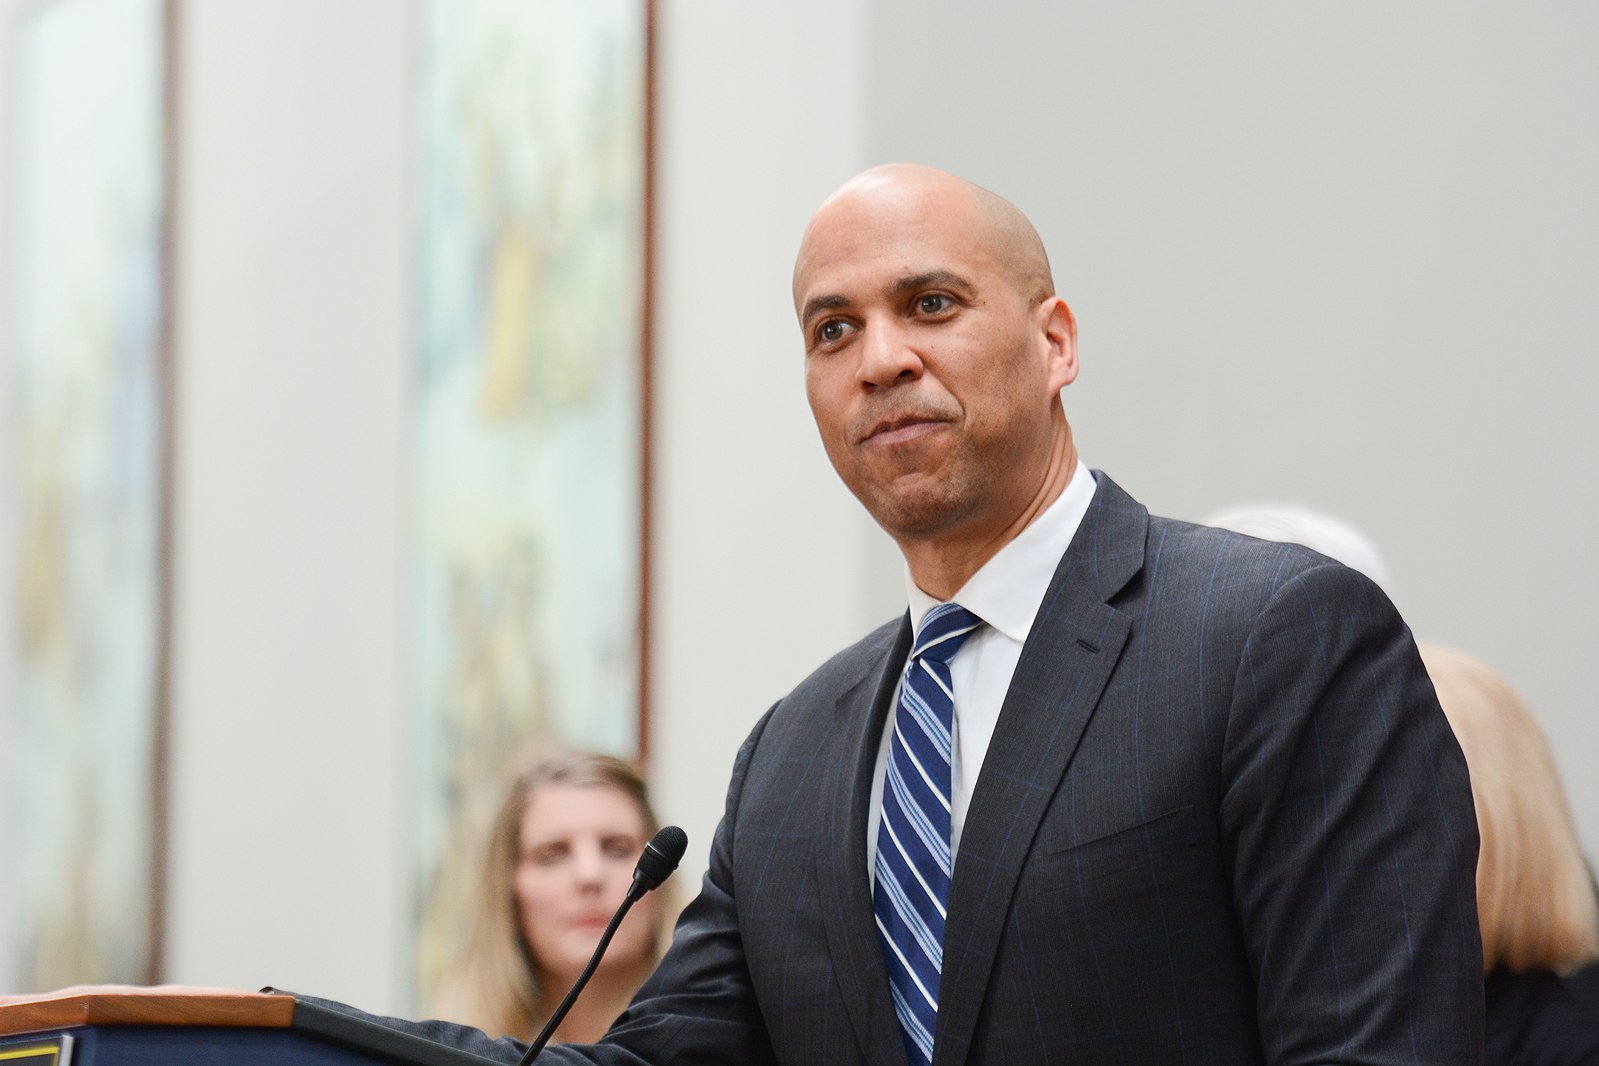 Cory Booker at an AFGE event, February 13, 2019